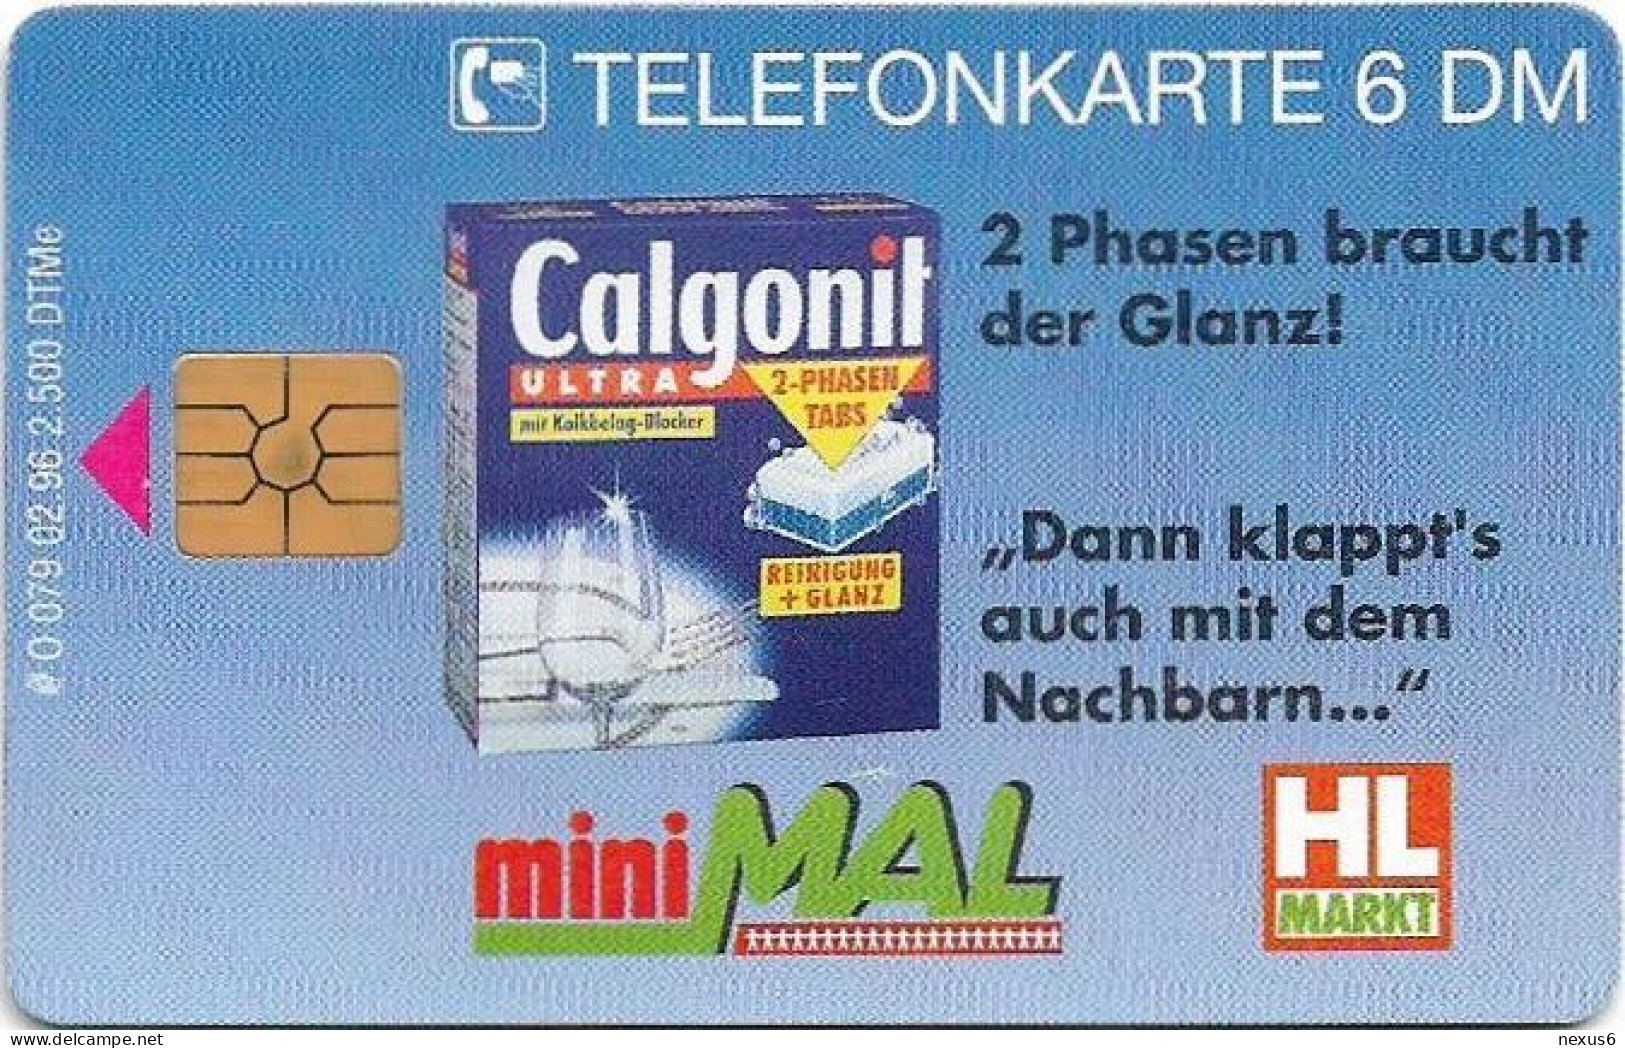 Germany - HL-Markt 2 - Calgonit - O 0079 - 02.1996, 6DM, 2.500ex, Used - O-Series : Séries Client